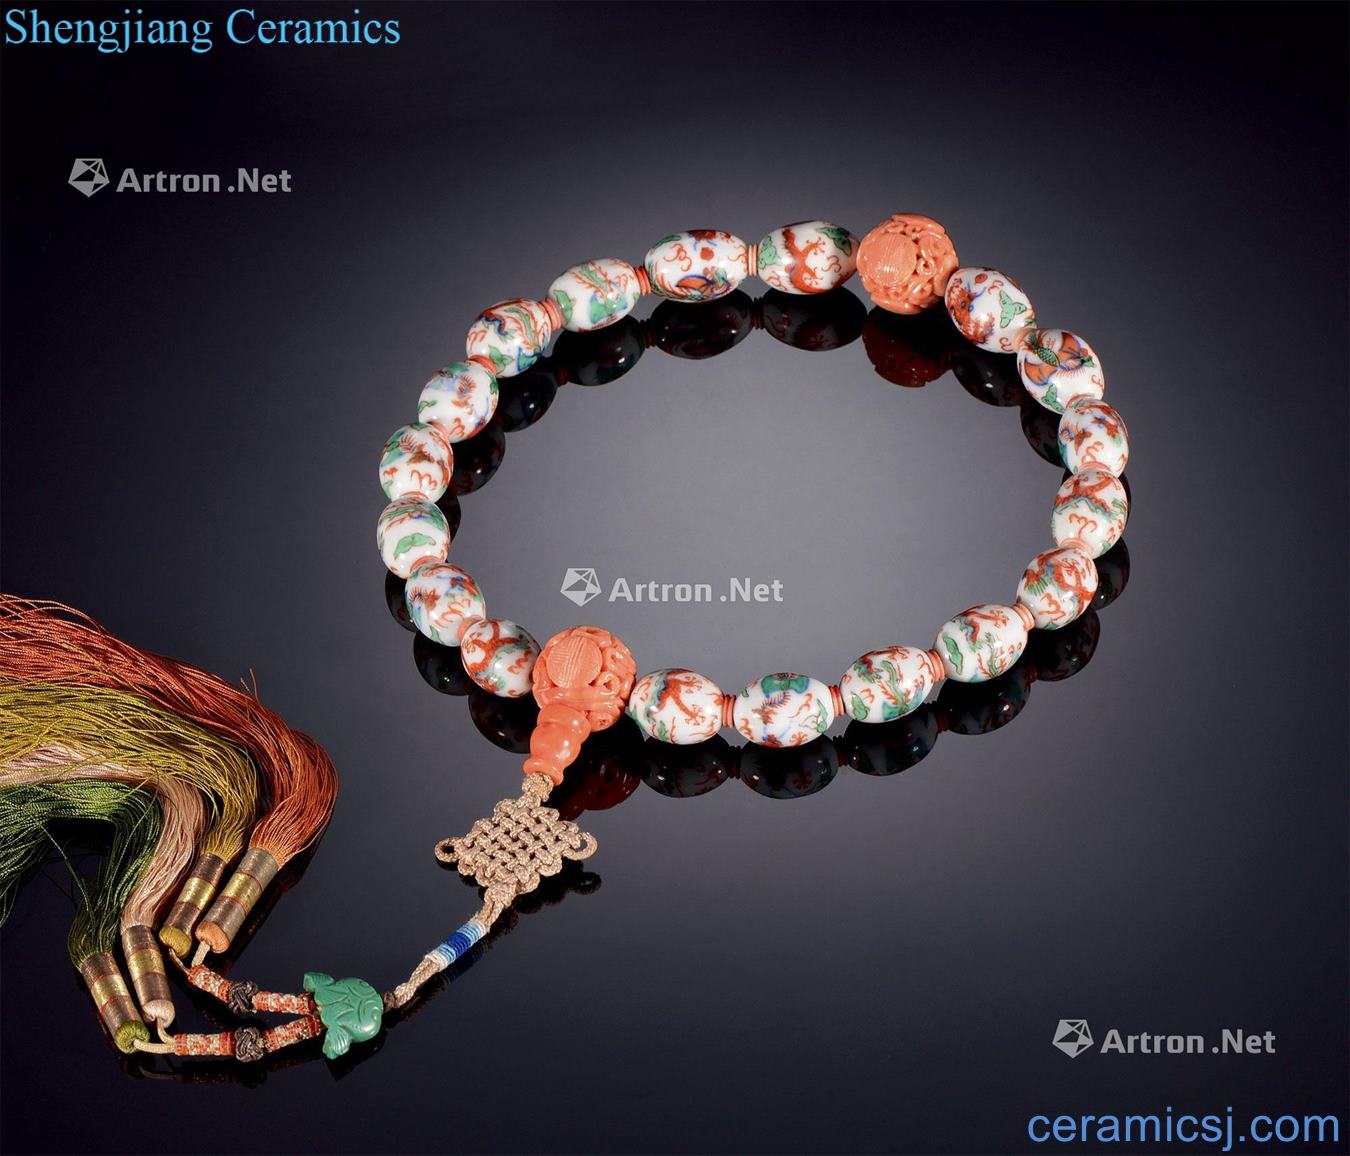 In the qing dynasty Colorful longfeng grain olive shape bead 18 son hand string (coral bead)